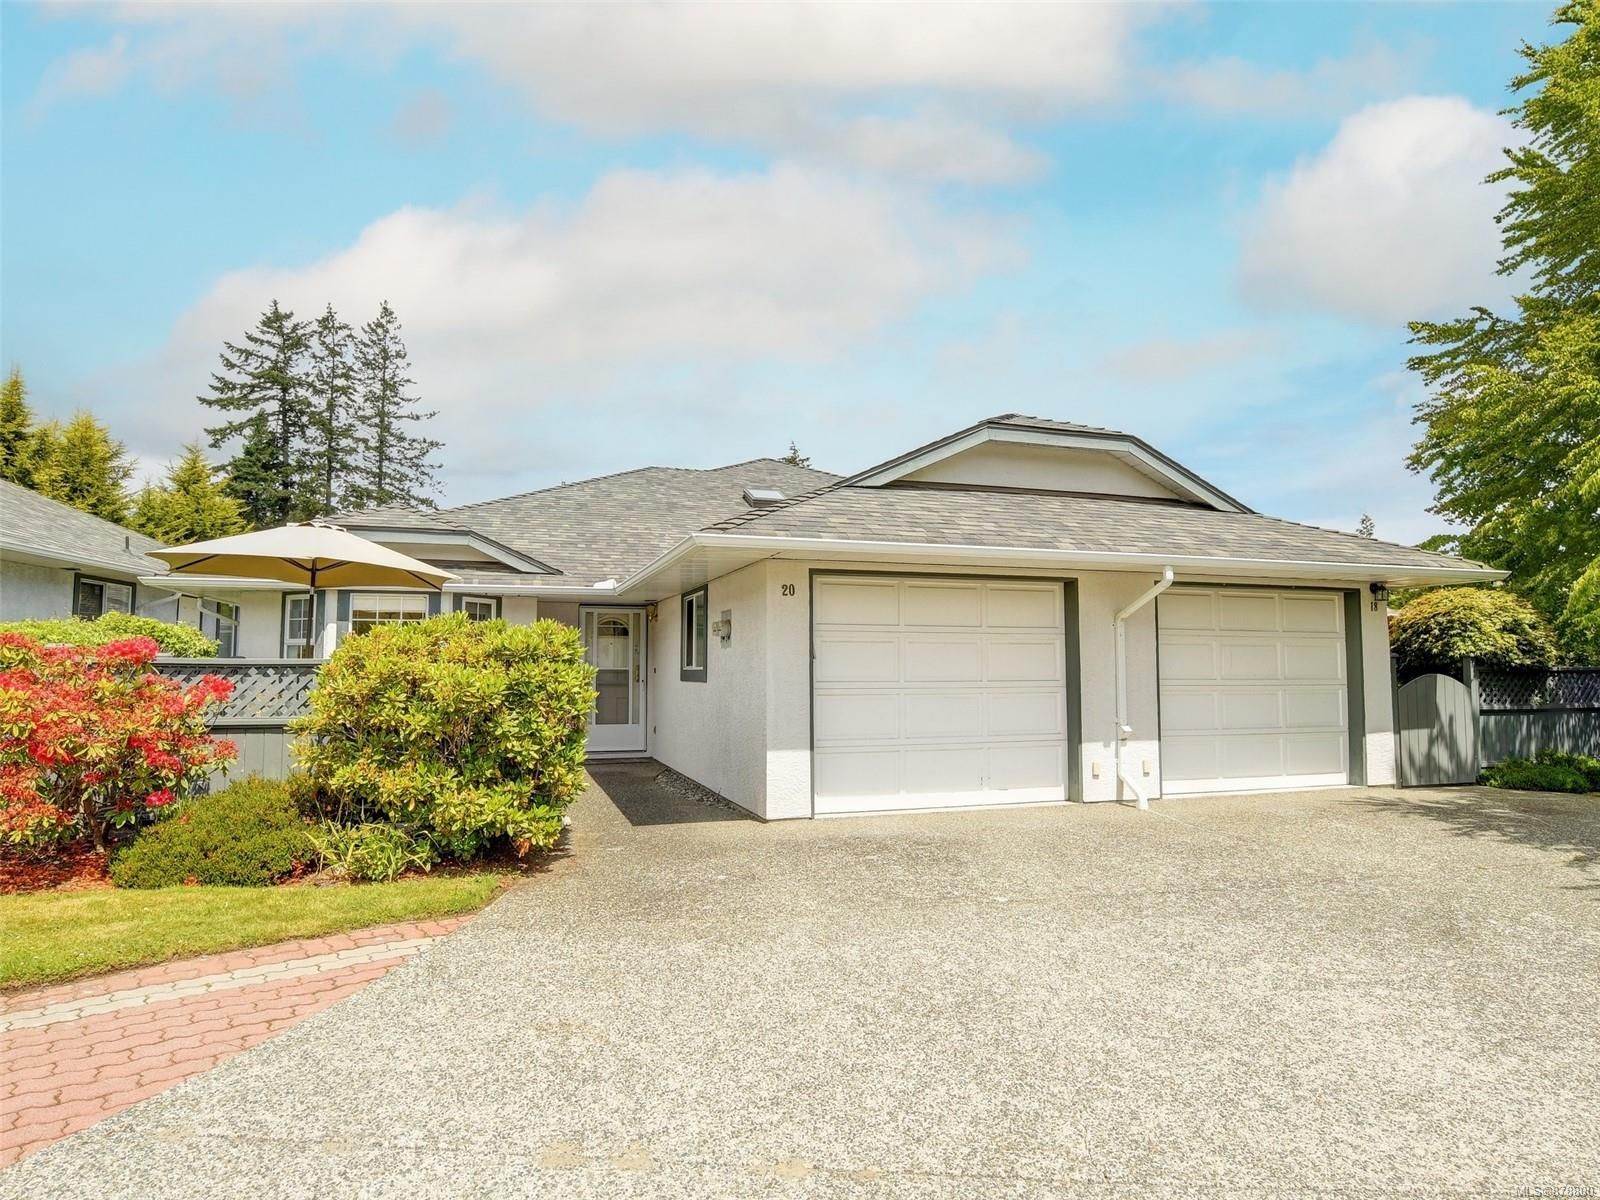 I have sold a property at 20 5110 Cordova Bay Rd in Saanich
